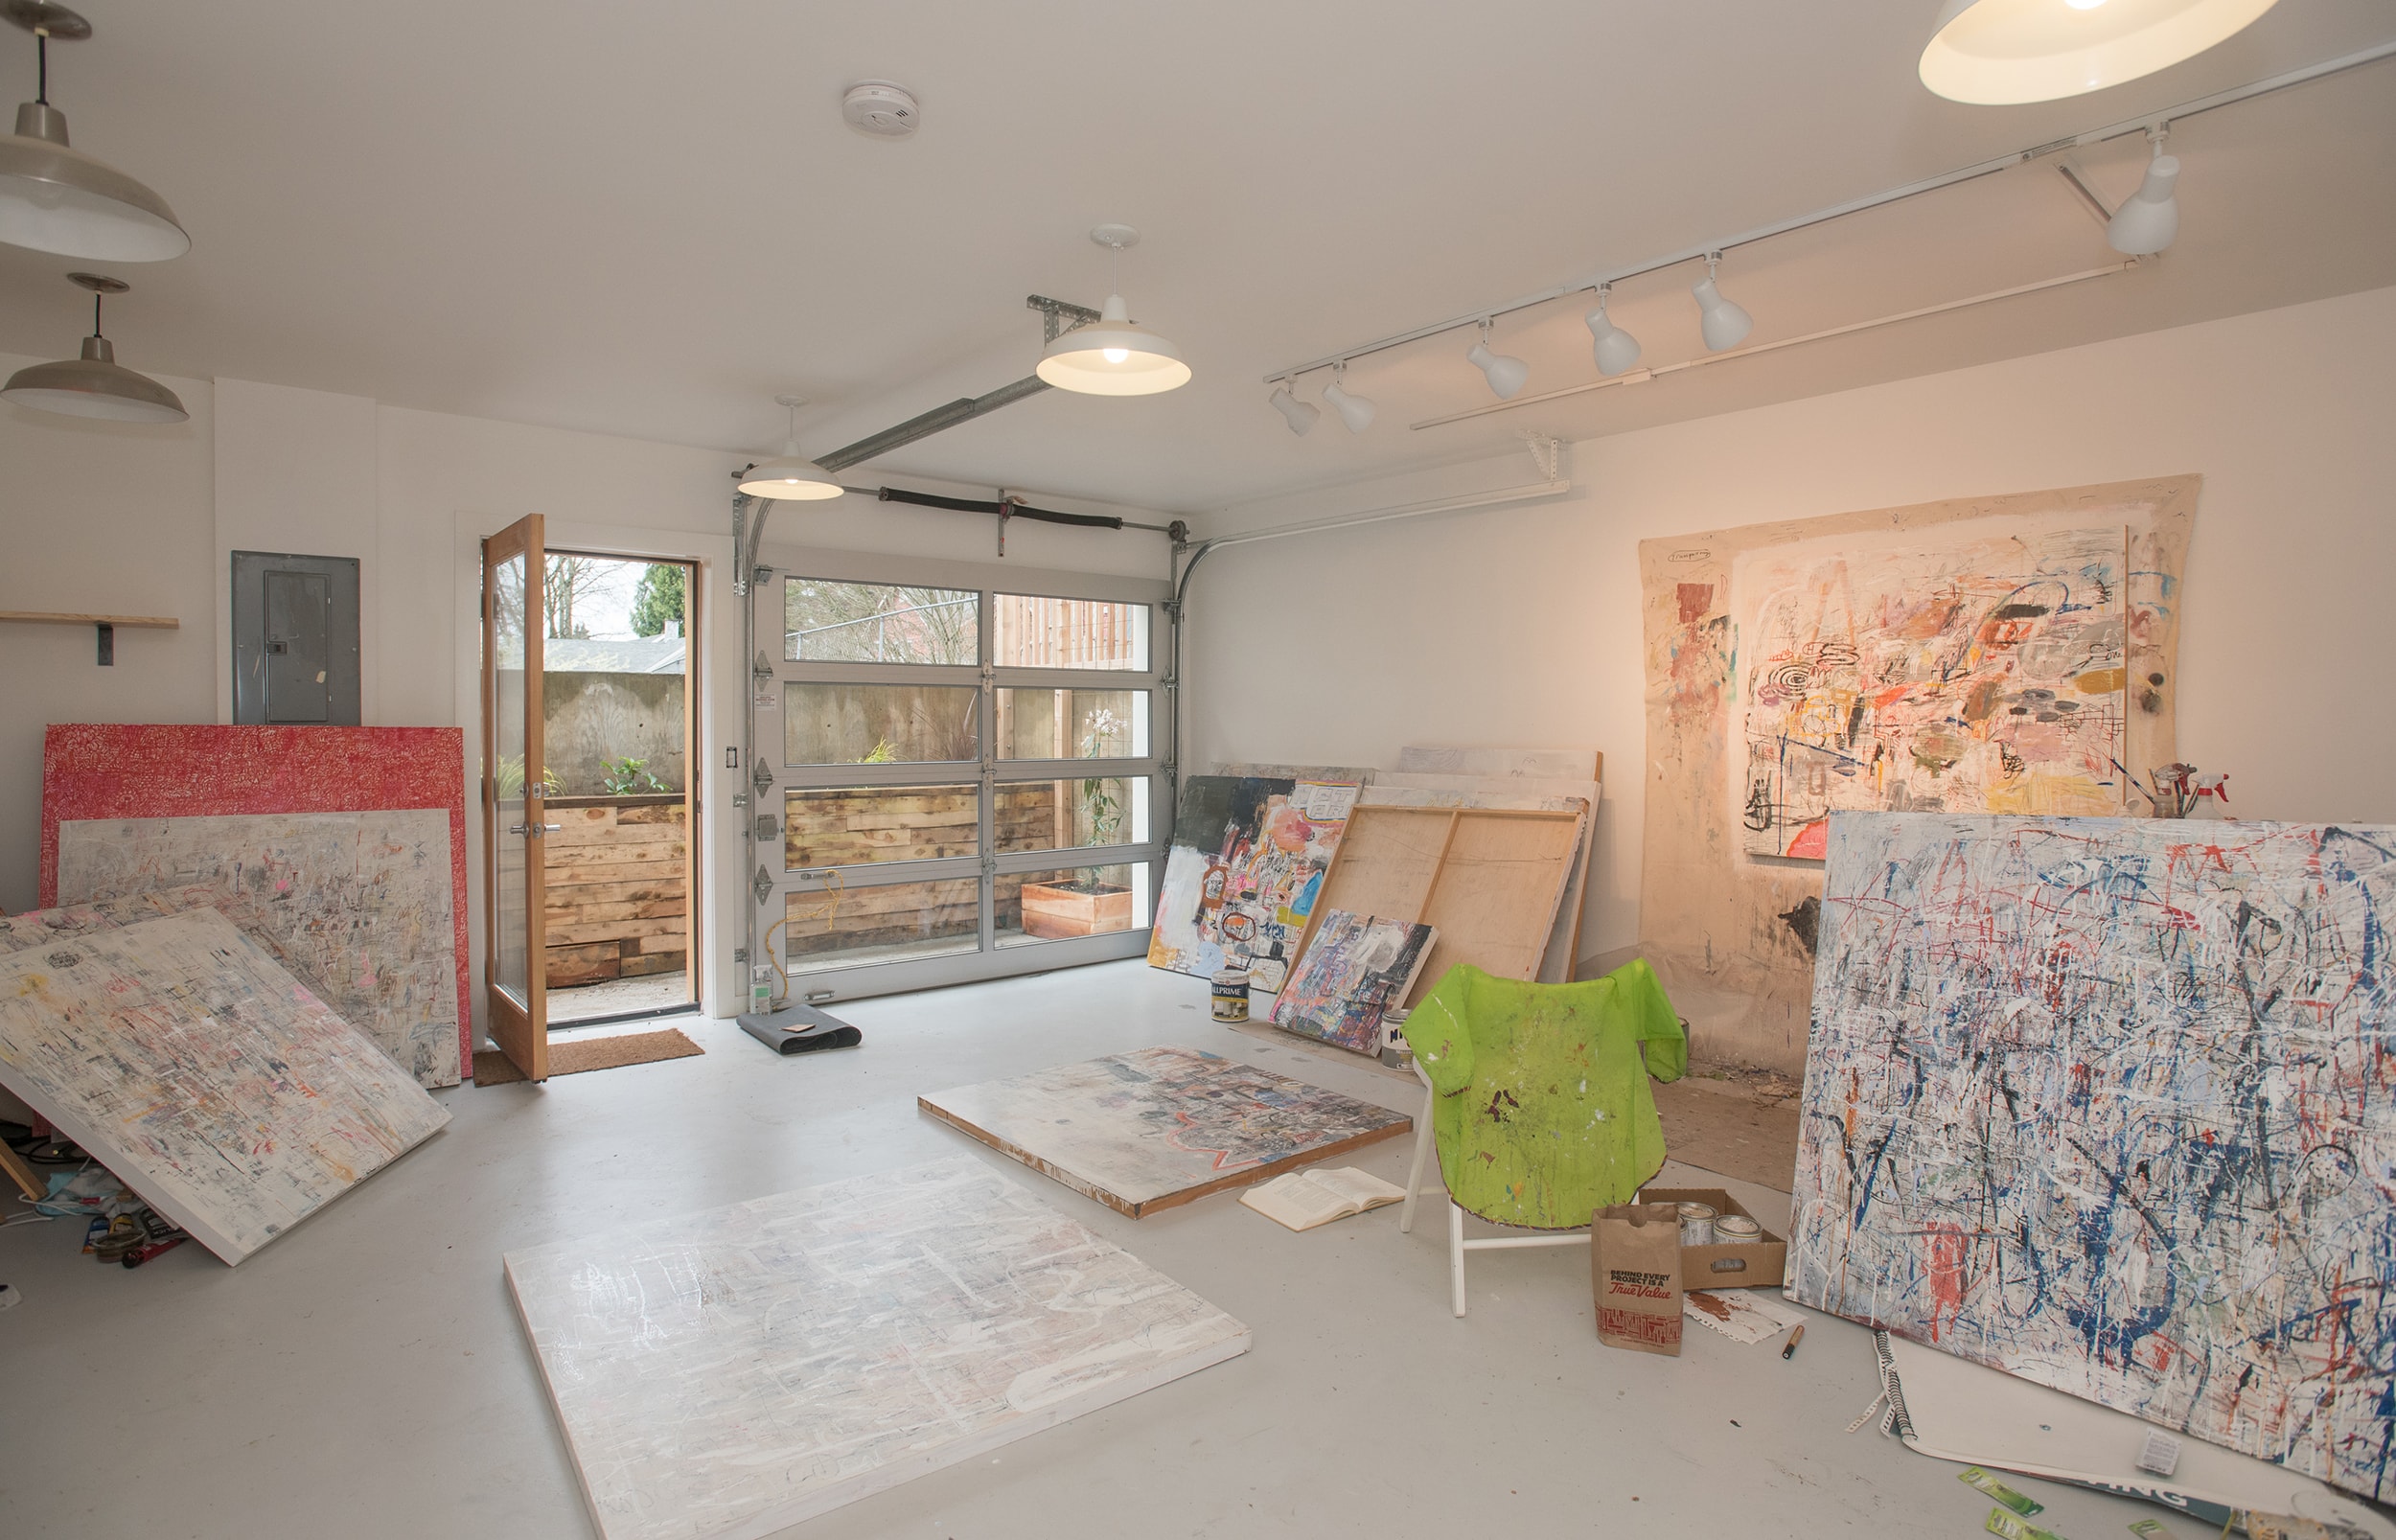 Be Inspired: 10 Airbnb Artist Studios for the Creative Traveler